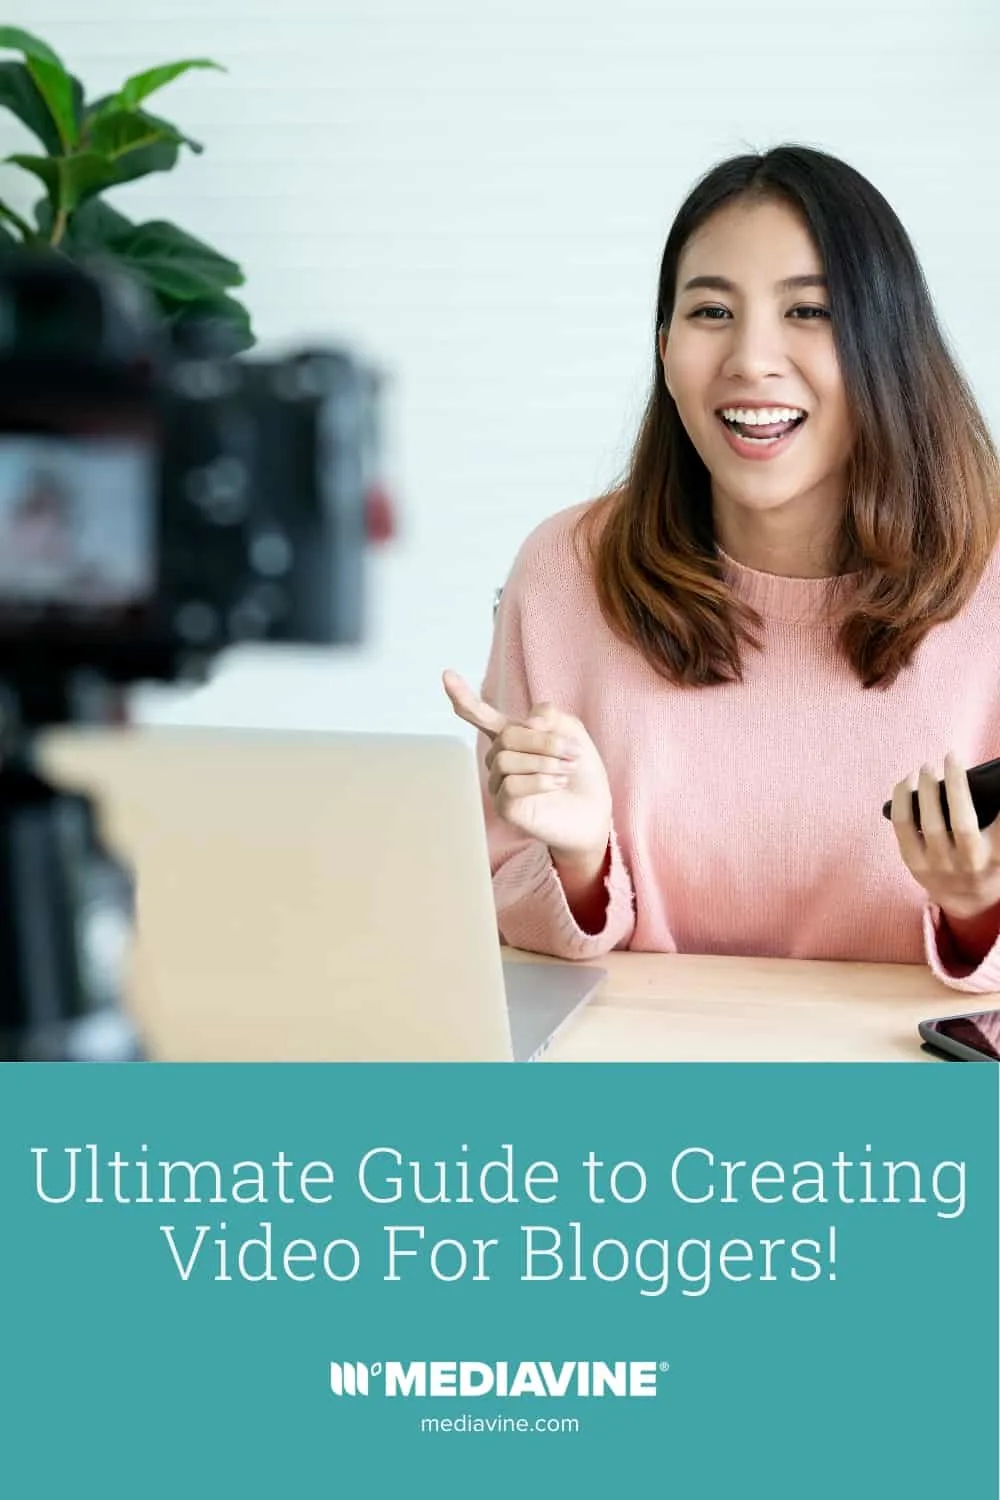 Mediavine Pinterest image - Ultimate Guide to Creating Video For Bloggers!